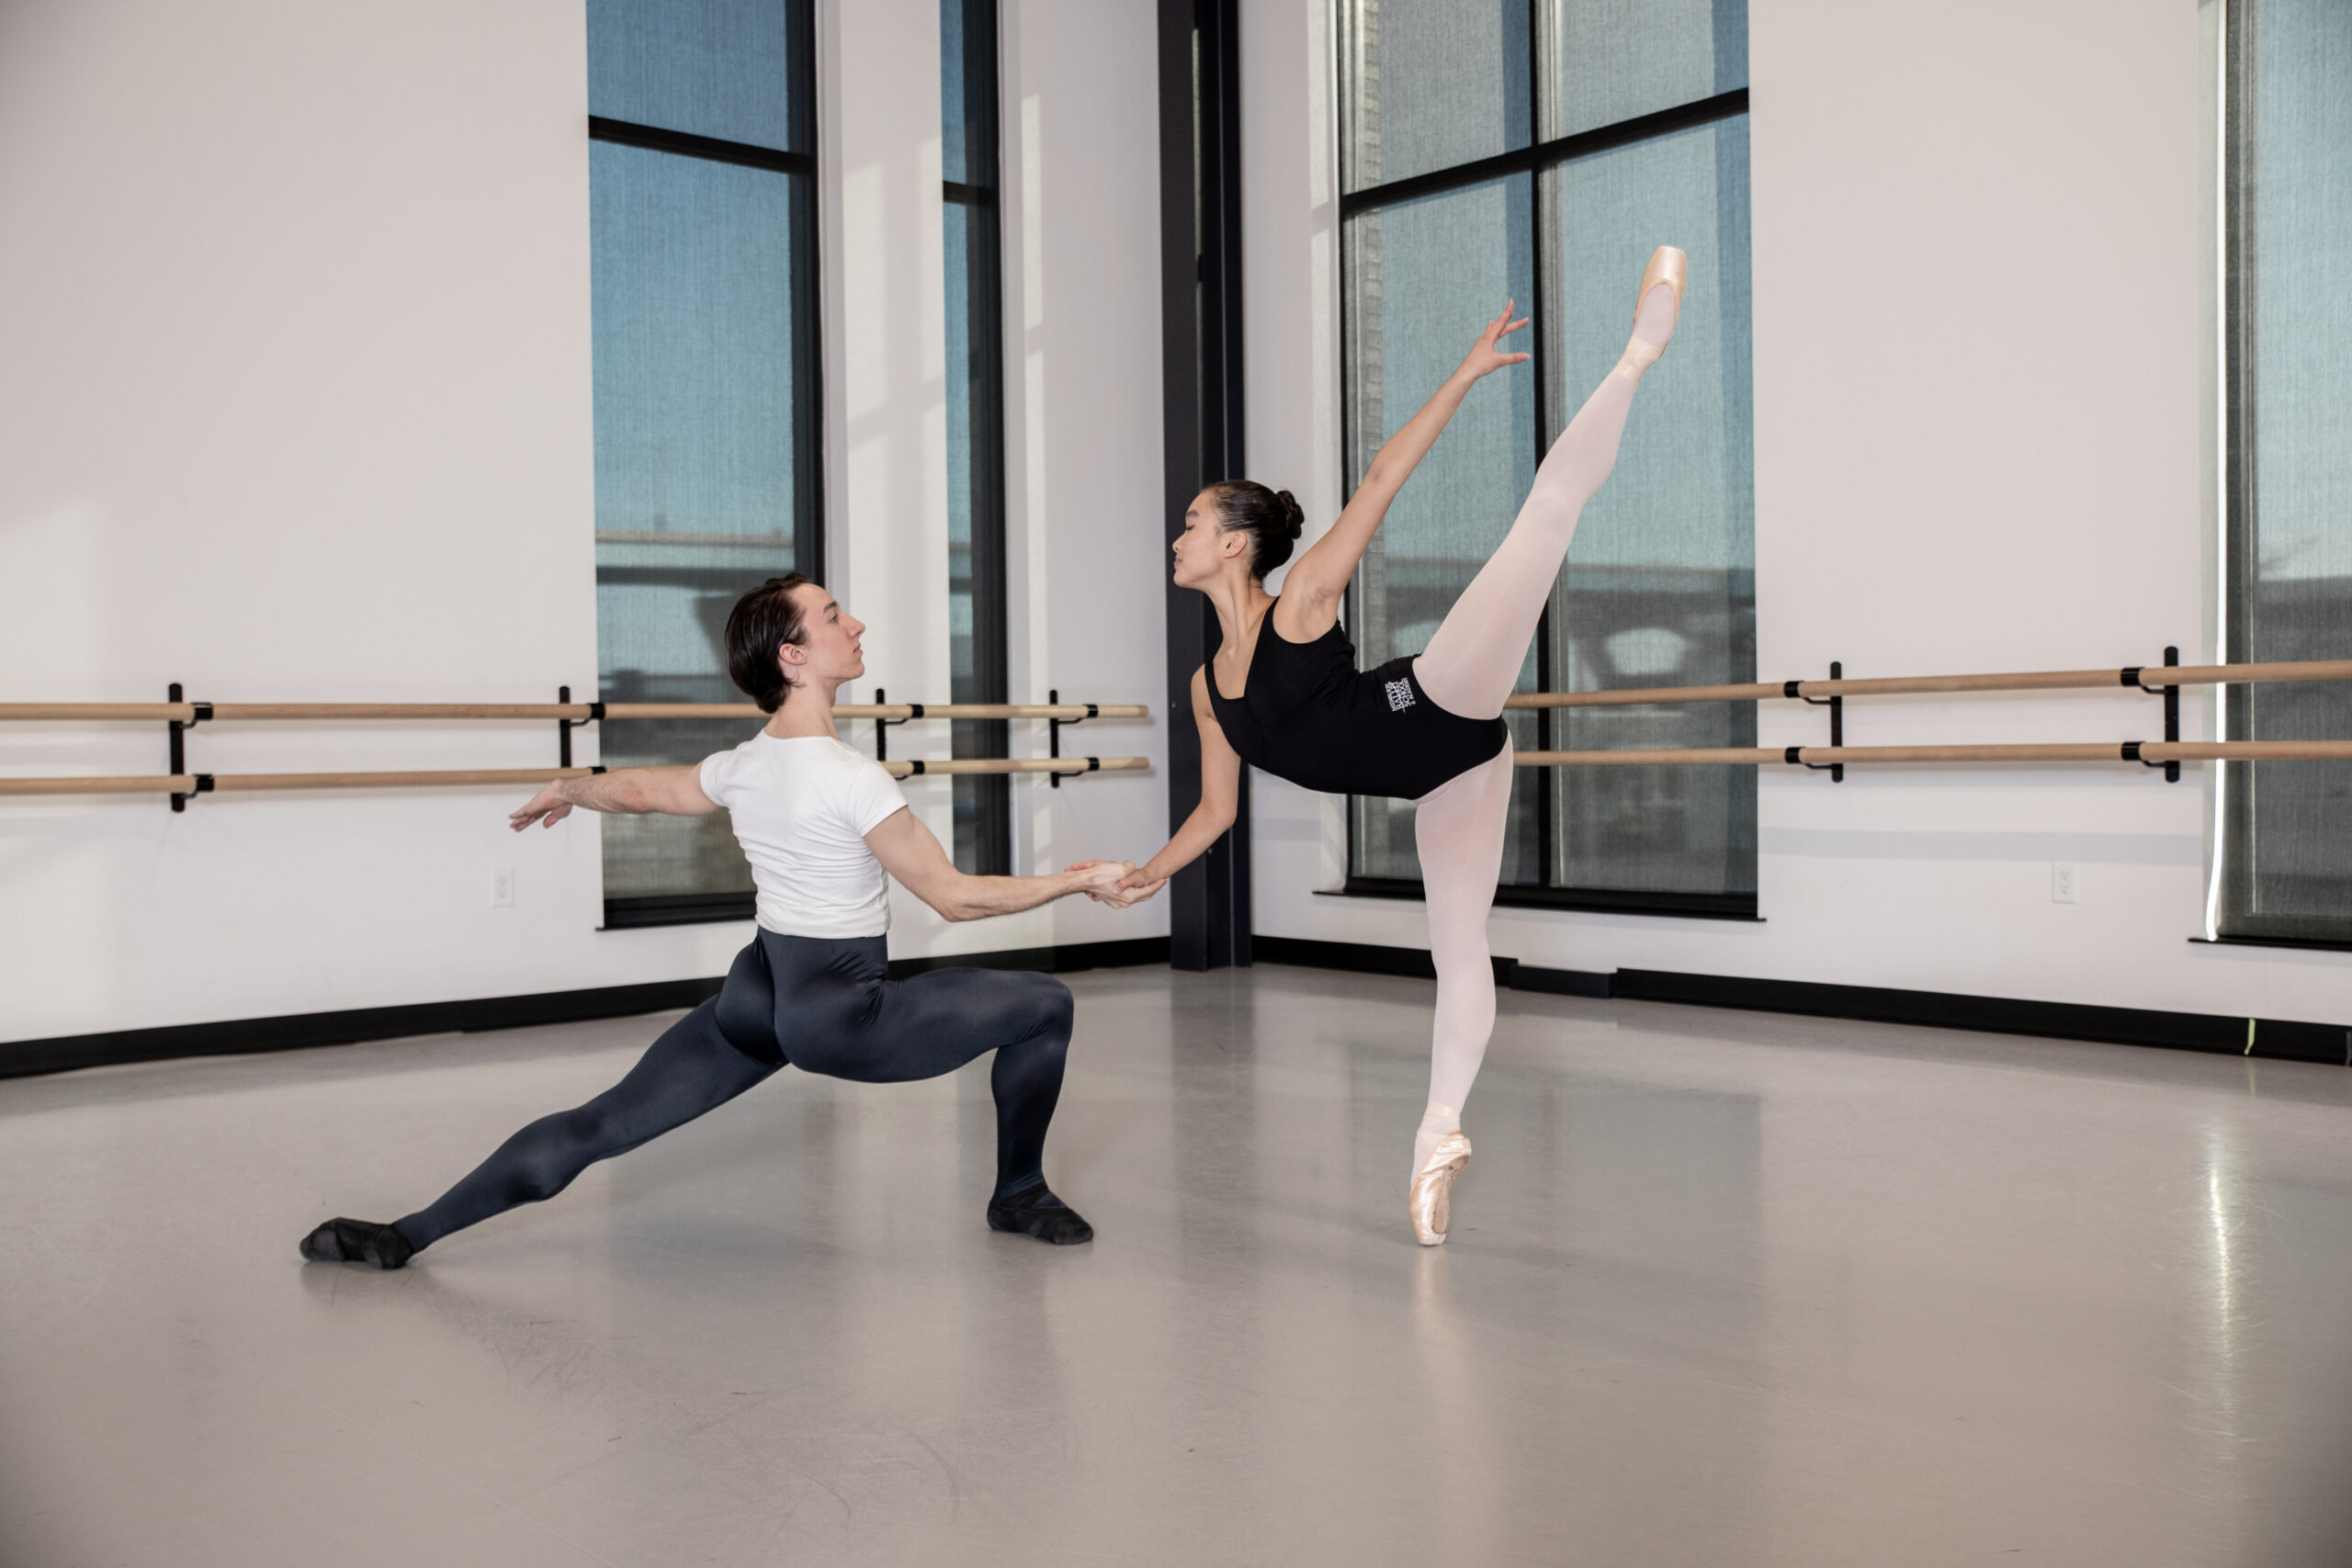 A male in a deep lunge holds her partner's hand as she does a piqué arabesque on pointe.